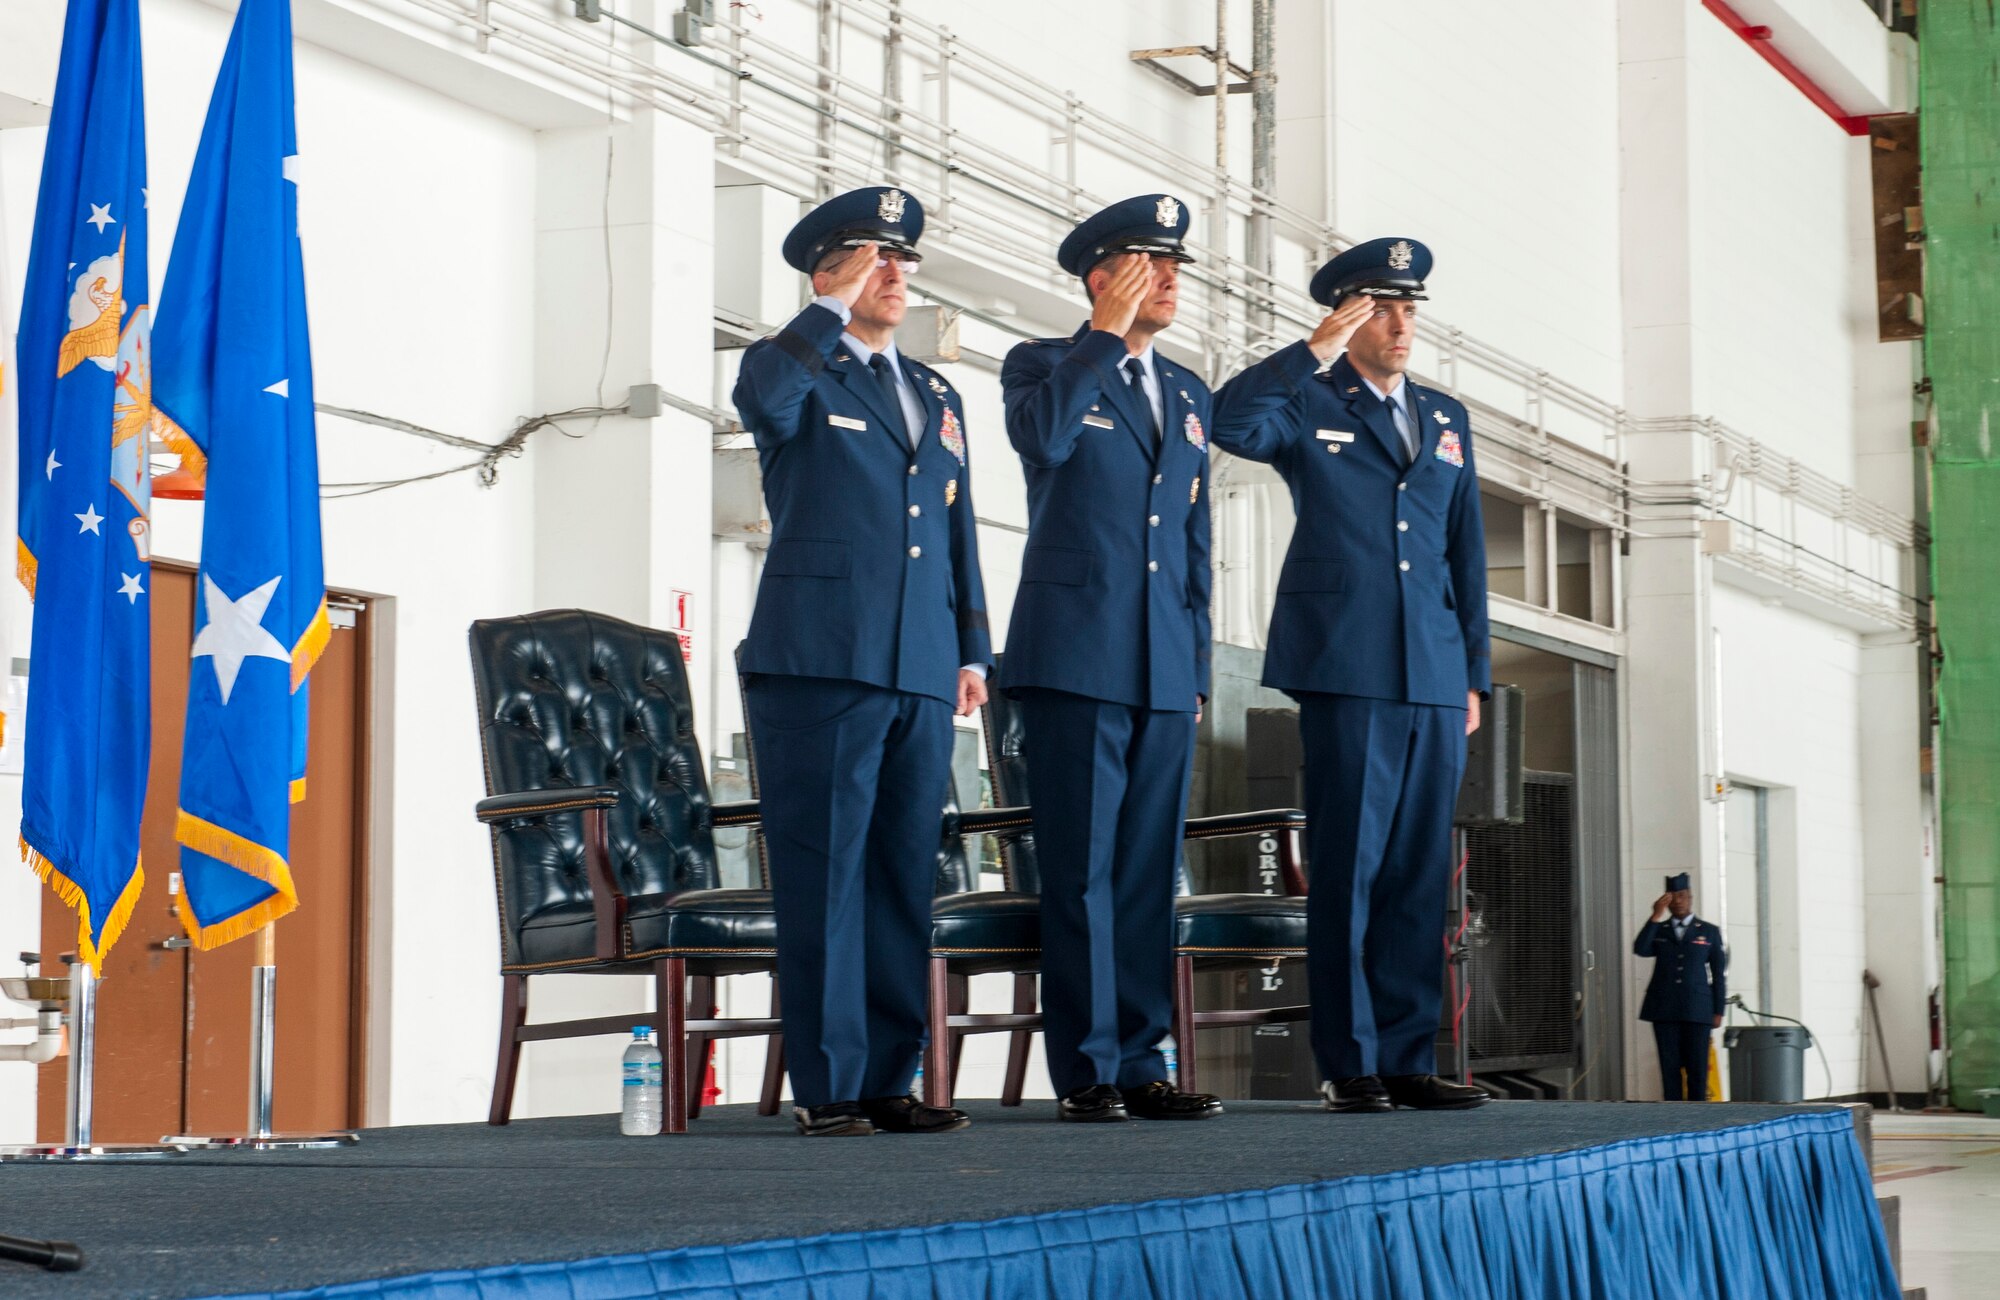 Col. Jason Kirby relinquished command of the 353rd Special Operations Group (SOG) to Col. Michael Thomas during a change of command ceremony on 3 July, 2019. 
Lt. Gen. James Slife, Air Force Special Operations Command commander, presided over the event held inside a hangar where the Airmen of the 353rd SOG and distinguished guests welcomed the new commander.